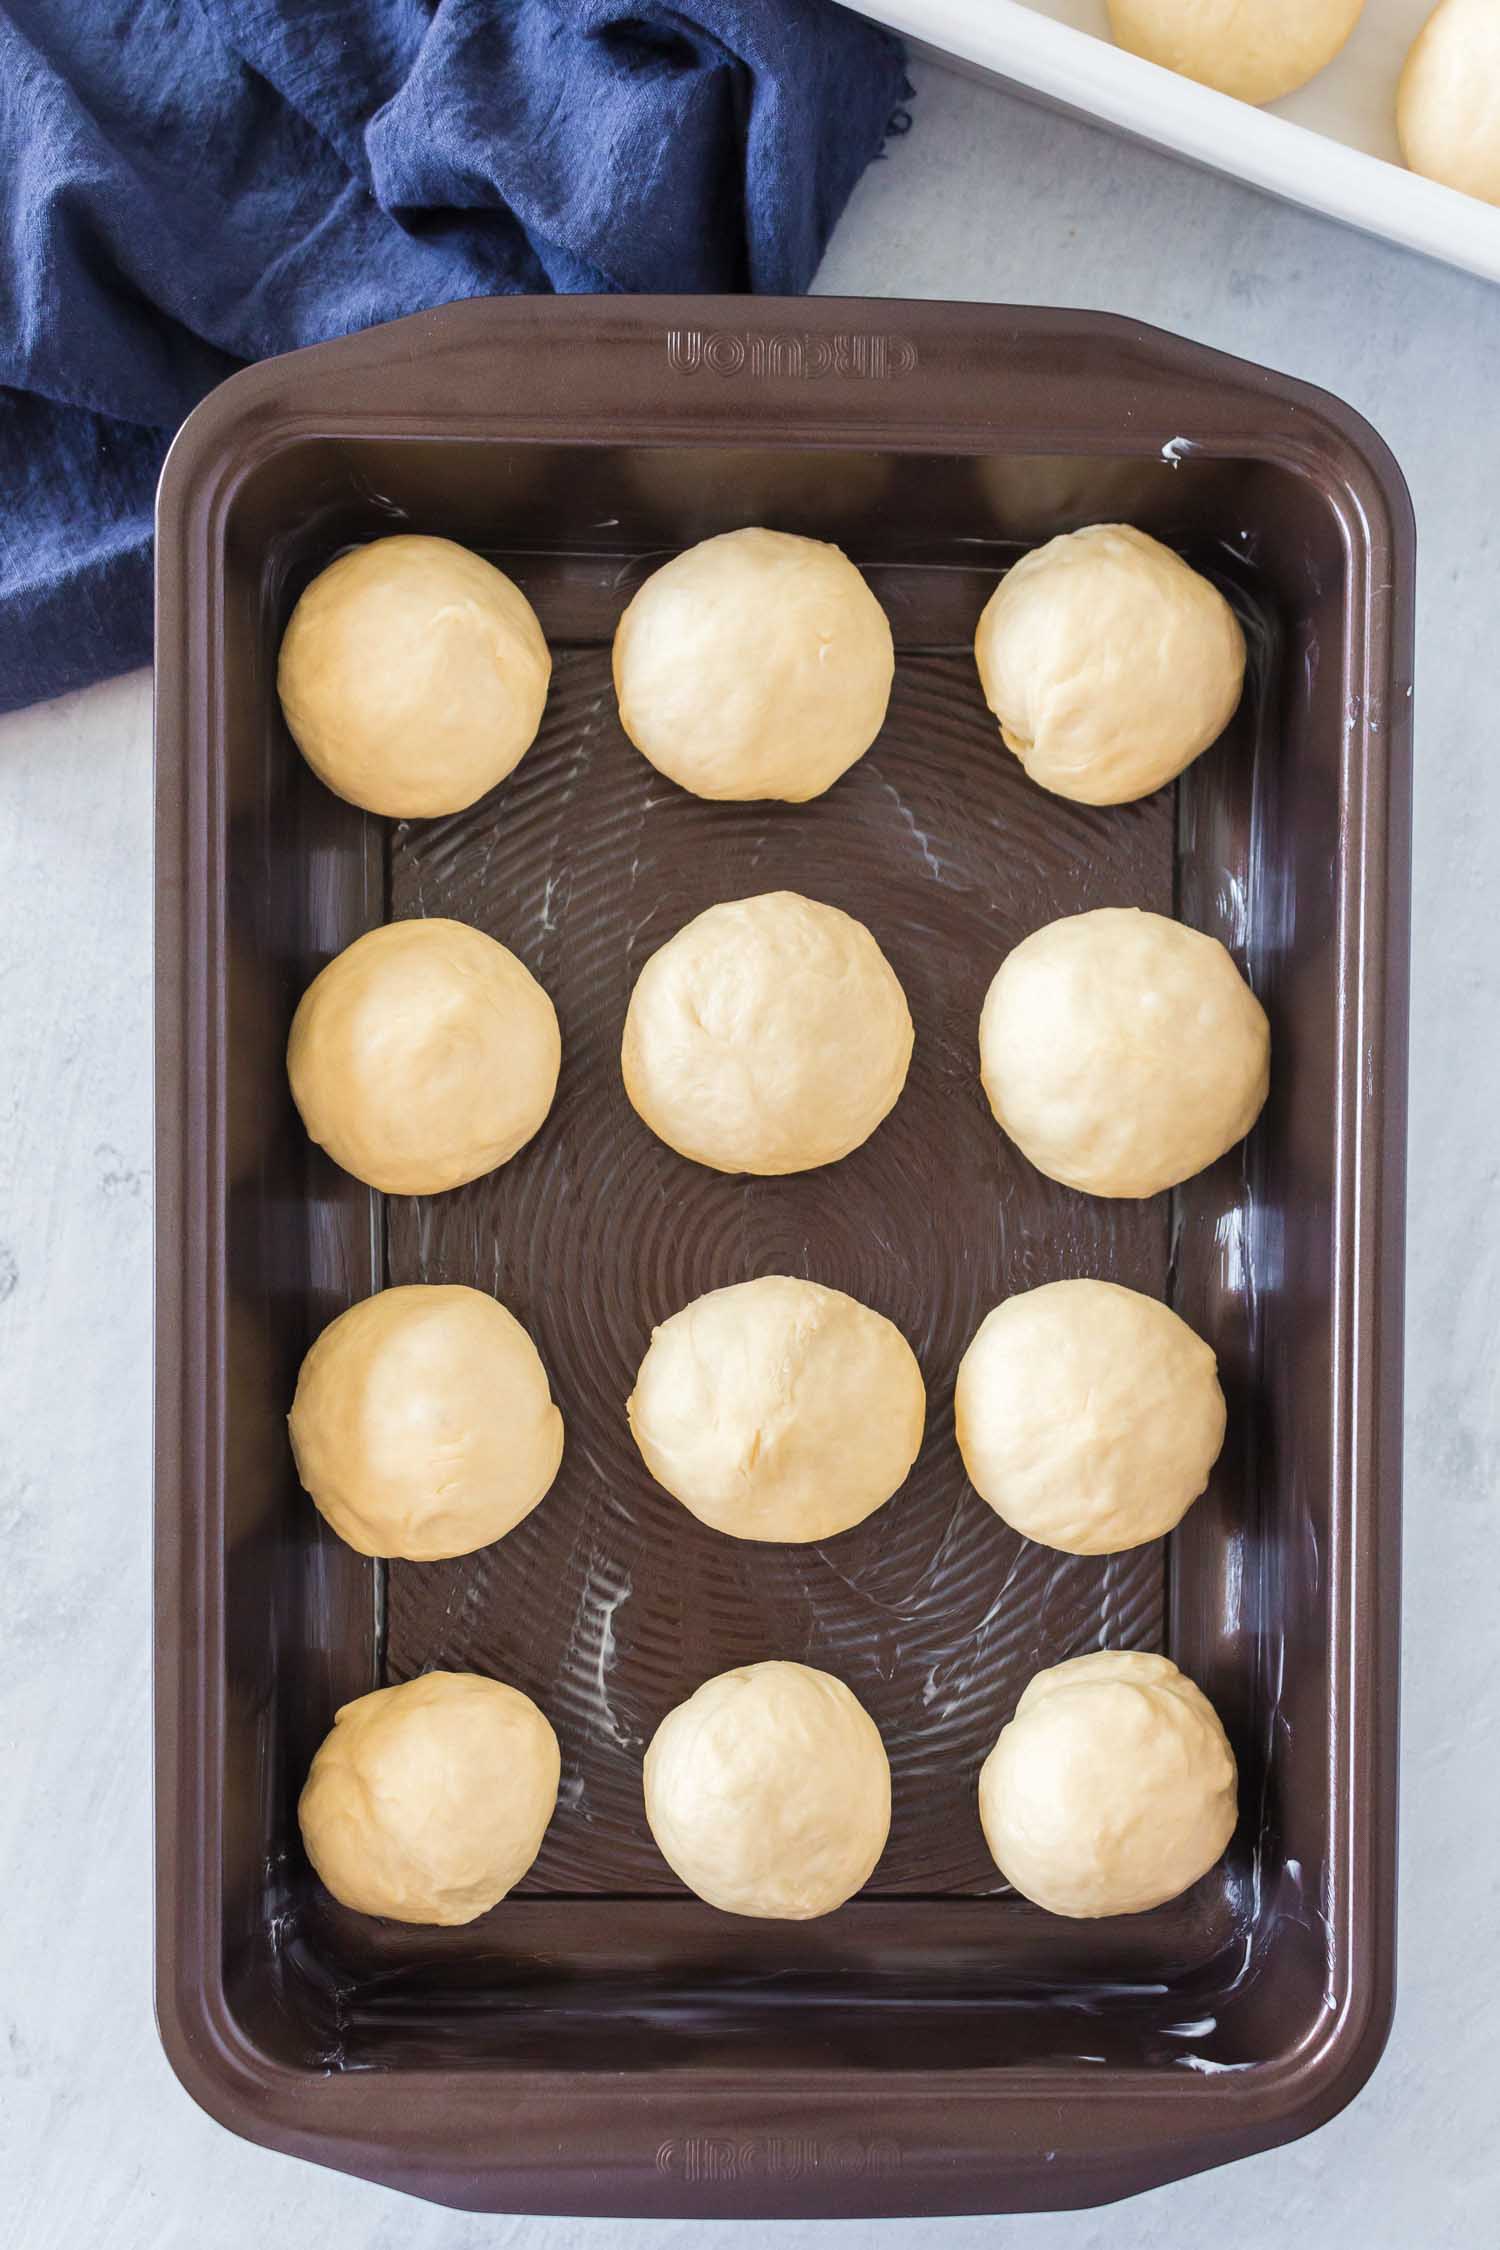 A dark nonstick buttered pan with 12 balls of uncooked dough.